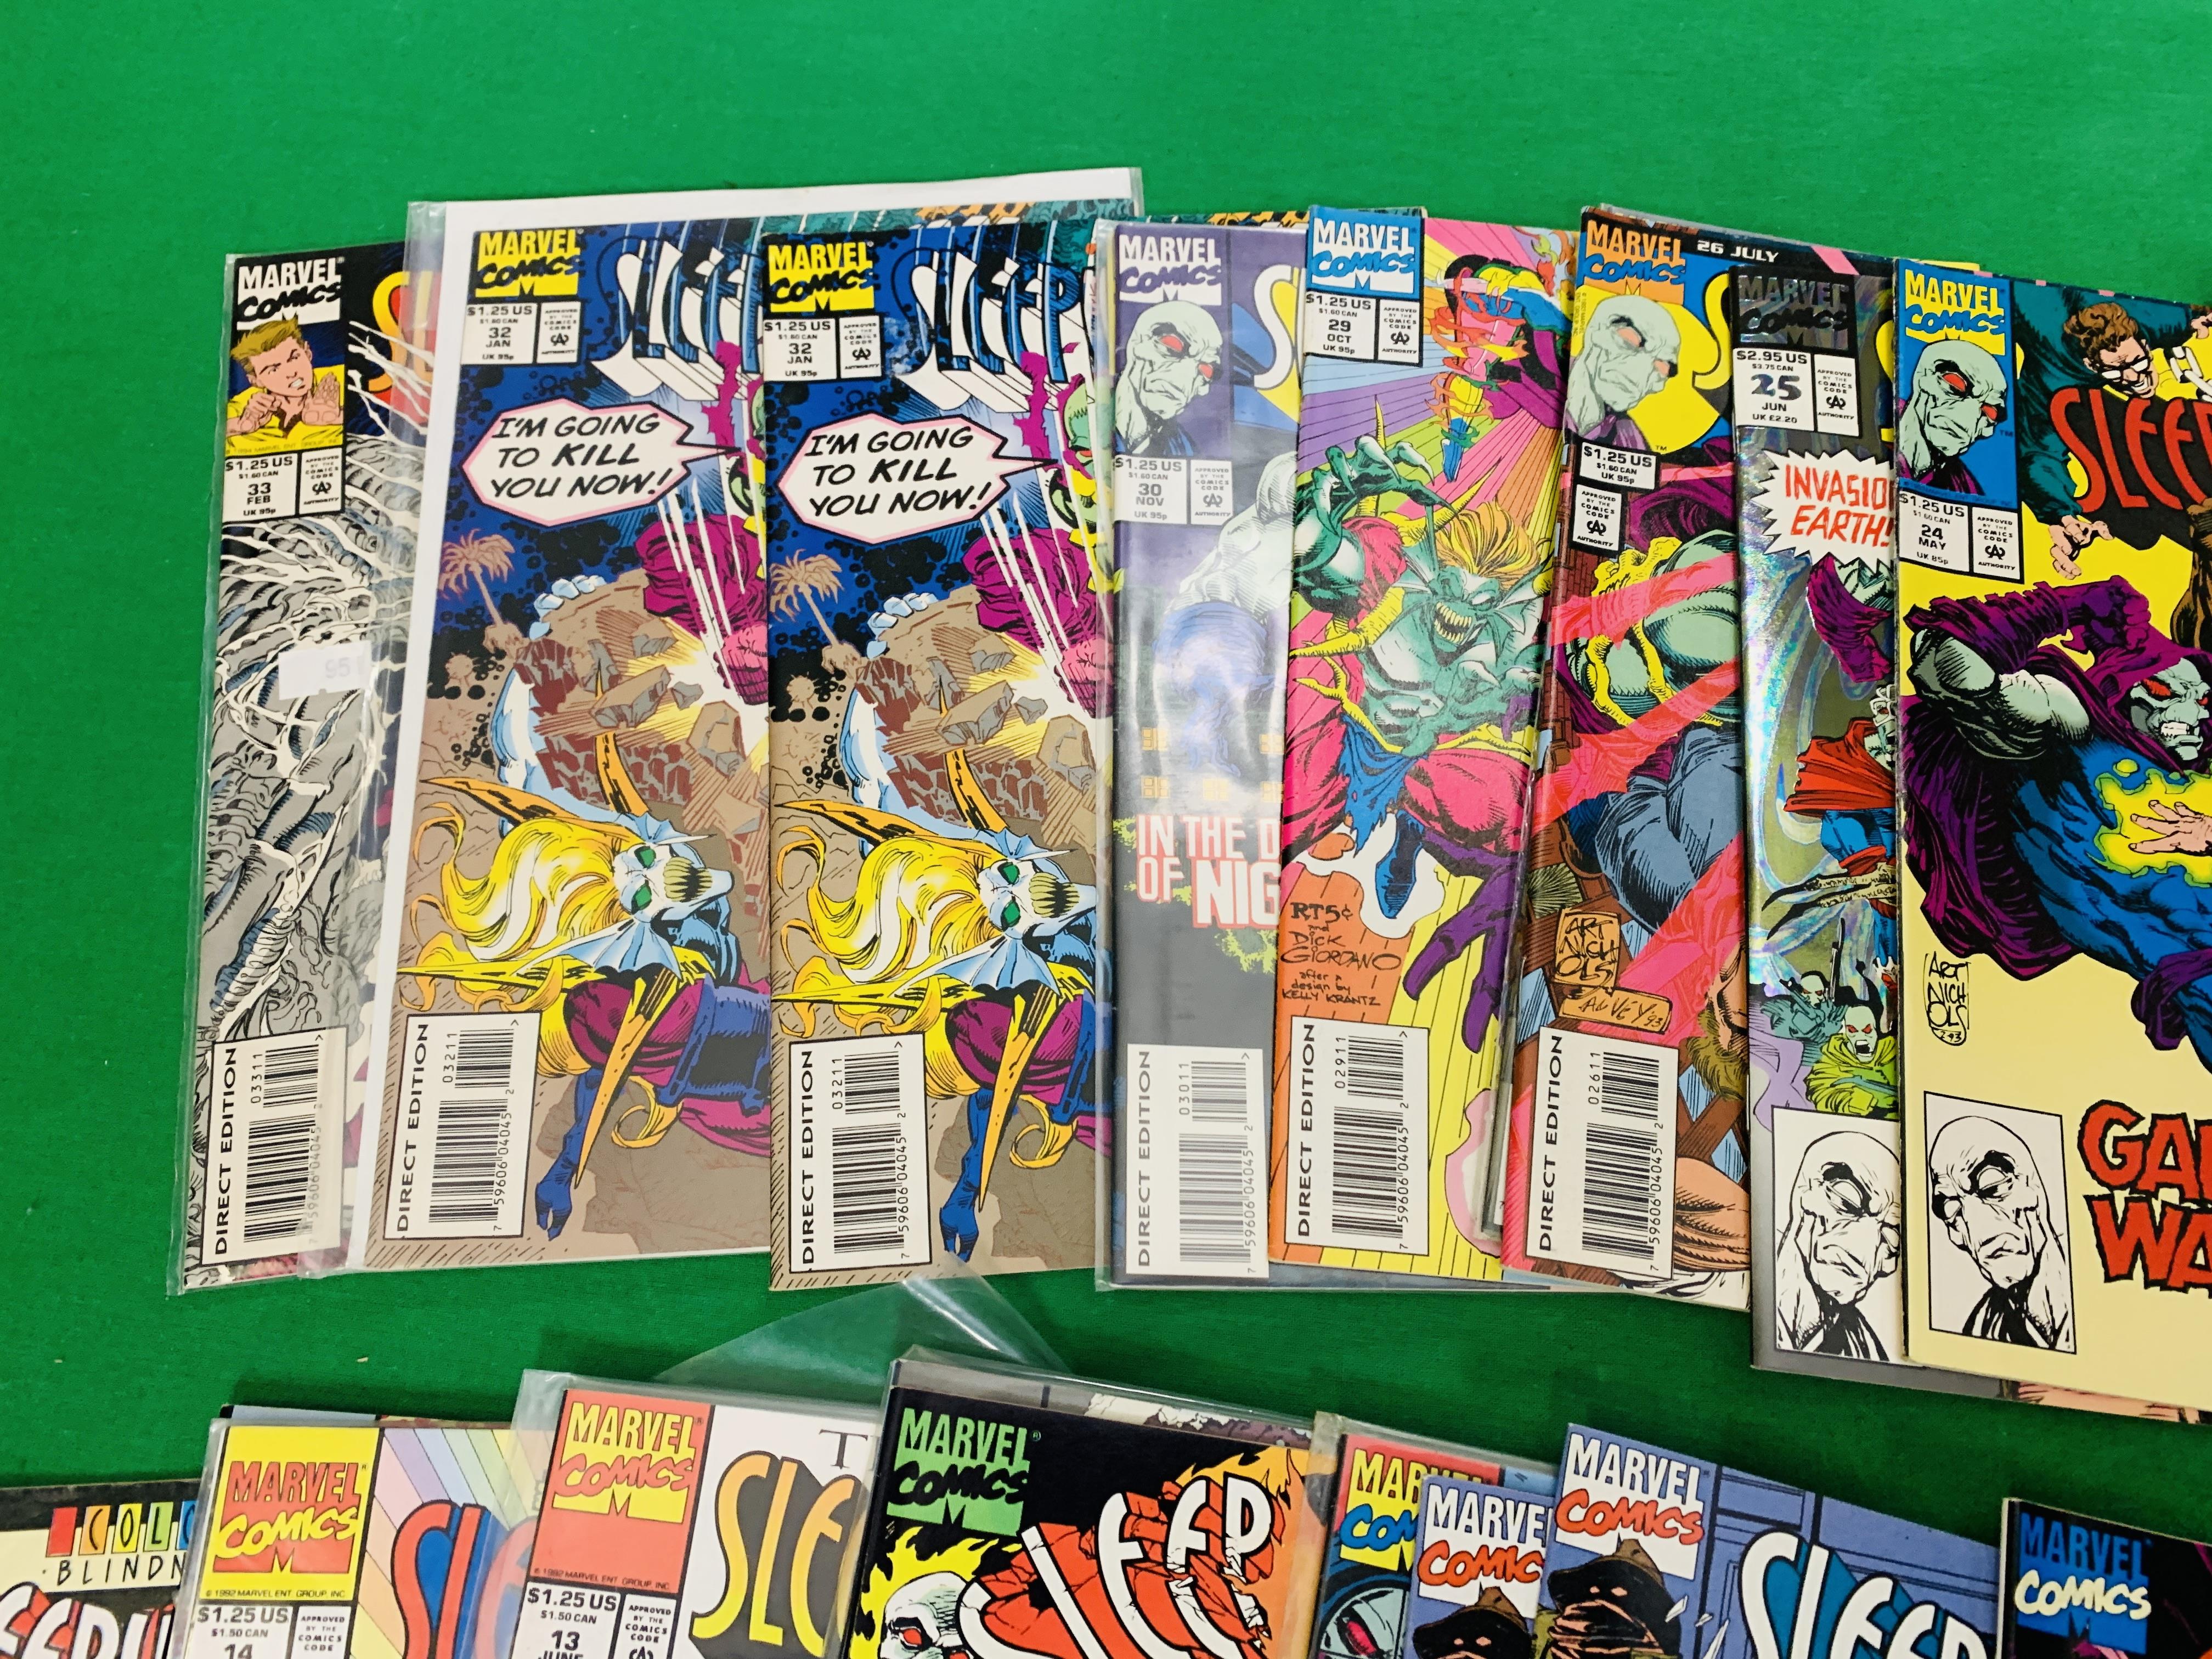 MARVEL COMICS SLEEPWALKER NO. 1 - 33 FROM 1991, FIRST APPEARANCE NO. - Image 7 of 7